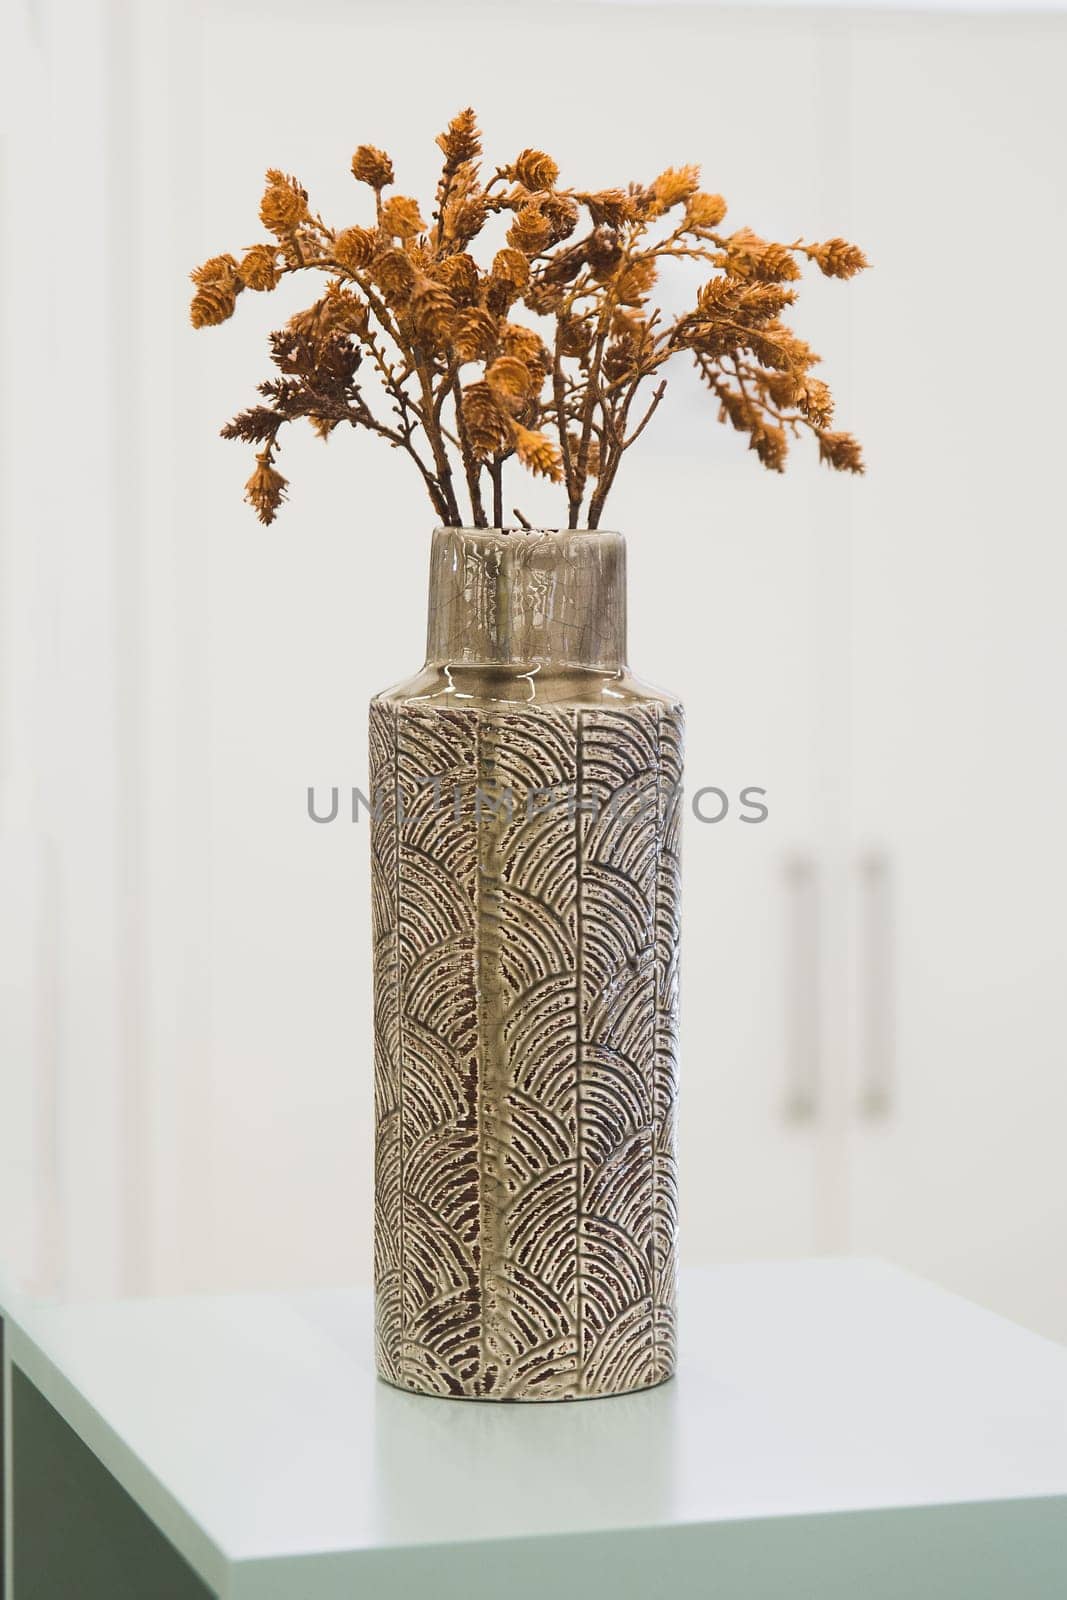 Decorative brown vase with dried plants in a bright interior.